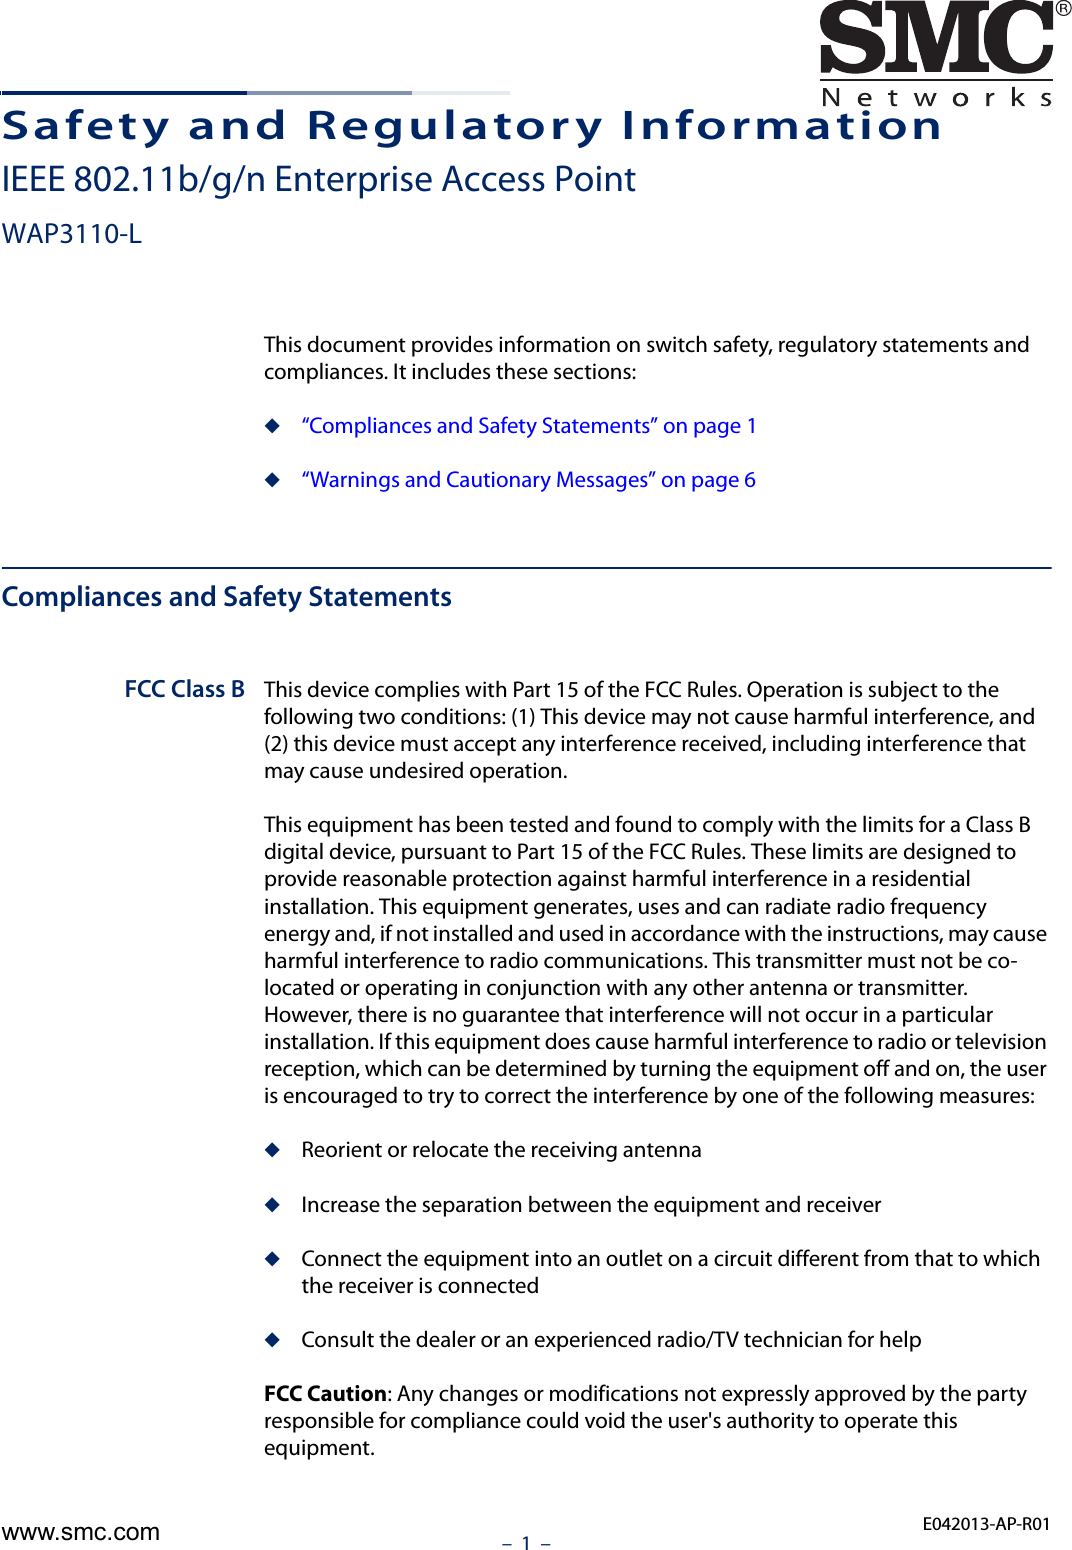 –  1  –Safety and Regulatory InformationIEEE 802.11b/g/n Enterprise Access PointWAP3110-LThis document provides information on switch safety, regulatory statements and compliances. It includes these sections:◆“Compliances and Safety Statements” on page 1◆“Warnings and Cautionary Messages” on page 6Compliances and Safety StatementsFCC Class B This device complies with Part 15 of the FCC Rules. Operation is subject to the following two conditions: (1) This device may not cause harmful interference, and (2) this device must accept any interference received, including interference that may cause undesired operation.This equipment has been tested and found to comply with the limits for a Class B digital device, pursuant to Part 15 of the FCC Rules. These limits are designed to provide reasonable protection against harmful interference in a residential installation. This equipment generates, uses and can radiate radio frequency energy and, if not installed and used in accordance with the instructions, may cause harmful interference to radio communications. This transmitter must not be co-located or operating in conjunction with any other antenna or transmitter. However, there is no guarantee that interference will not occur in a particular installation. If this equipment does cause harmful interference to radio or television reception, which can be determined by turning the equipment off and on, the user is encouraged to try to correct the interference by one of the following measures:◆Reorient or relocate the receiving antenna◆Increase the separation between the equipment and receiver◆Connect the equipment into an outlet on a circuit different from that to which the receiver is connected◆Consult the dealer or an experienced radio/TV technician for helpFCC Caution: Any changes or modifications not expressly approved by the party responsible for compliance could void the user&apos;s authority to operate this equipment. E042013-AP-R01www.smc.com